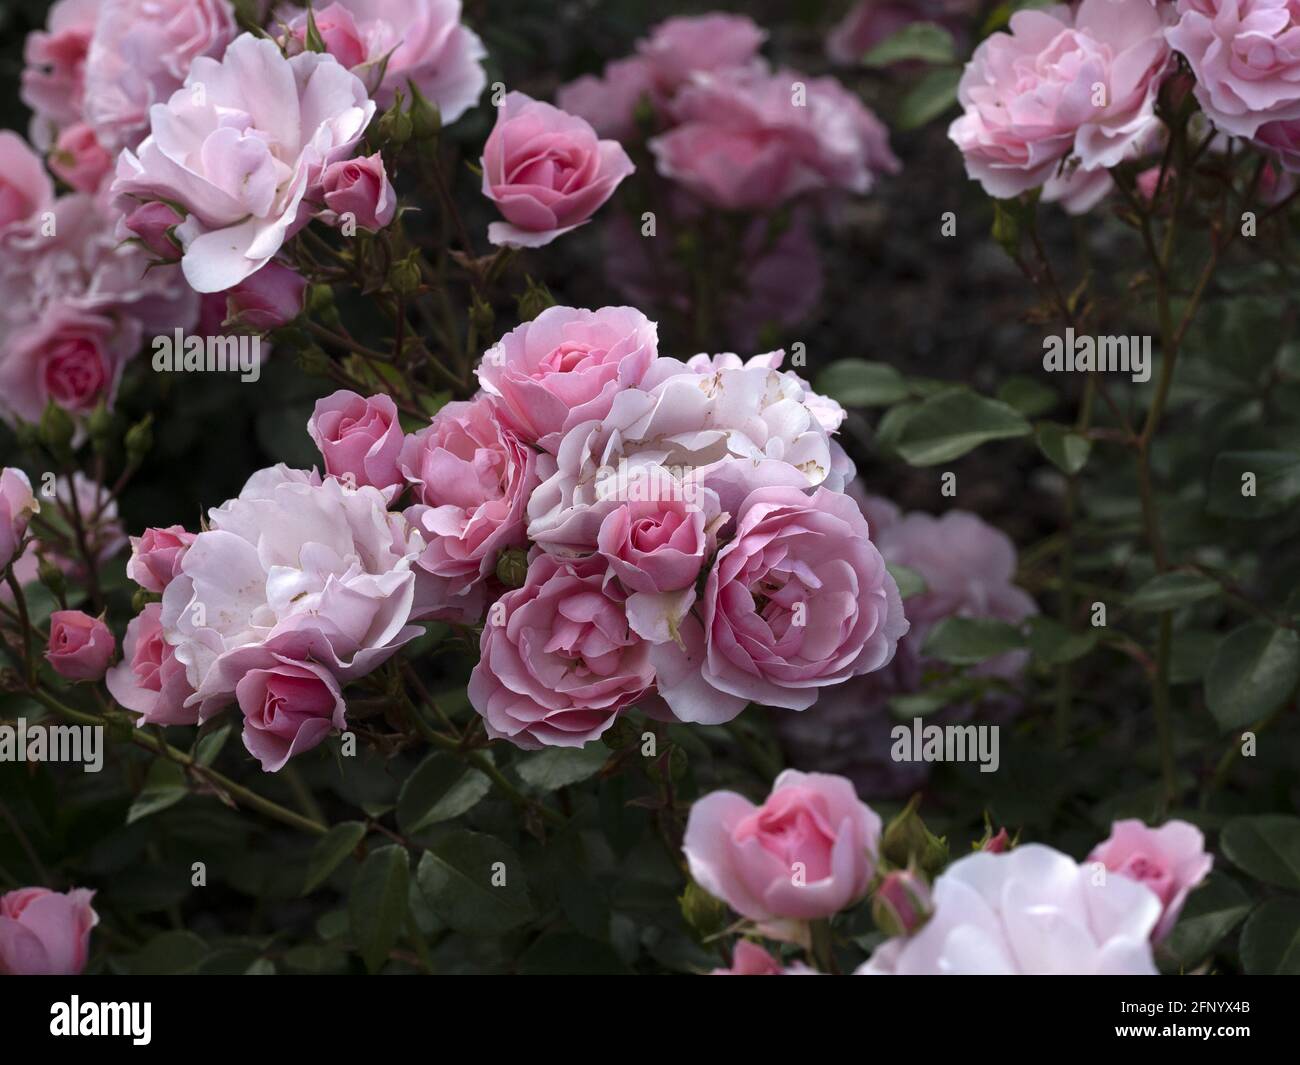 species Bonica 82 Rare rose flower at cultivation garden macro close up Stock Photo